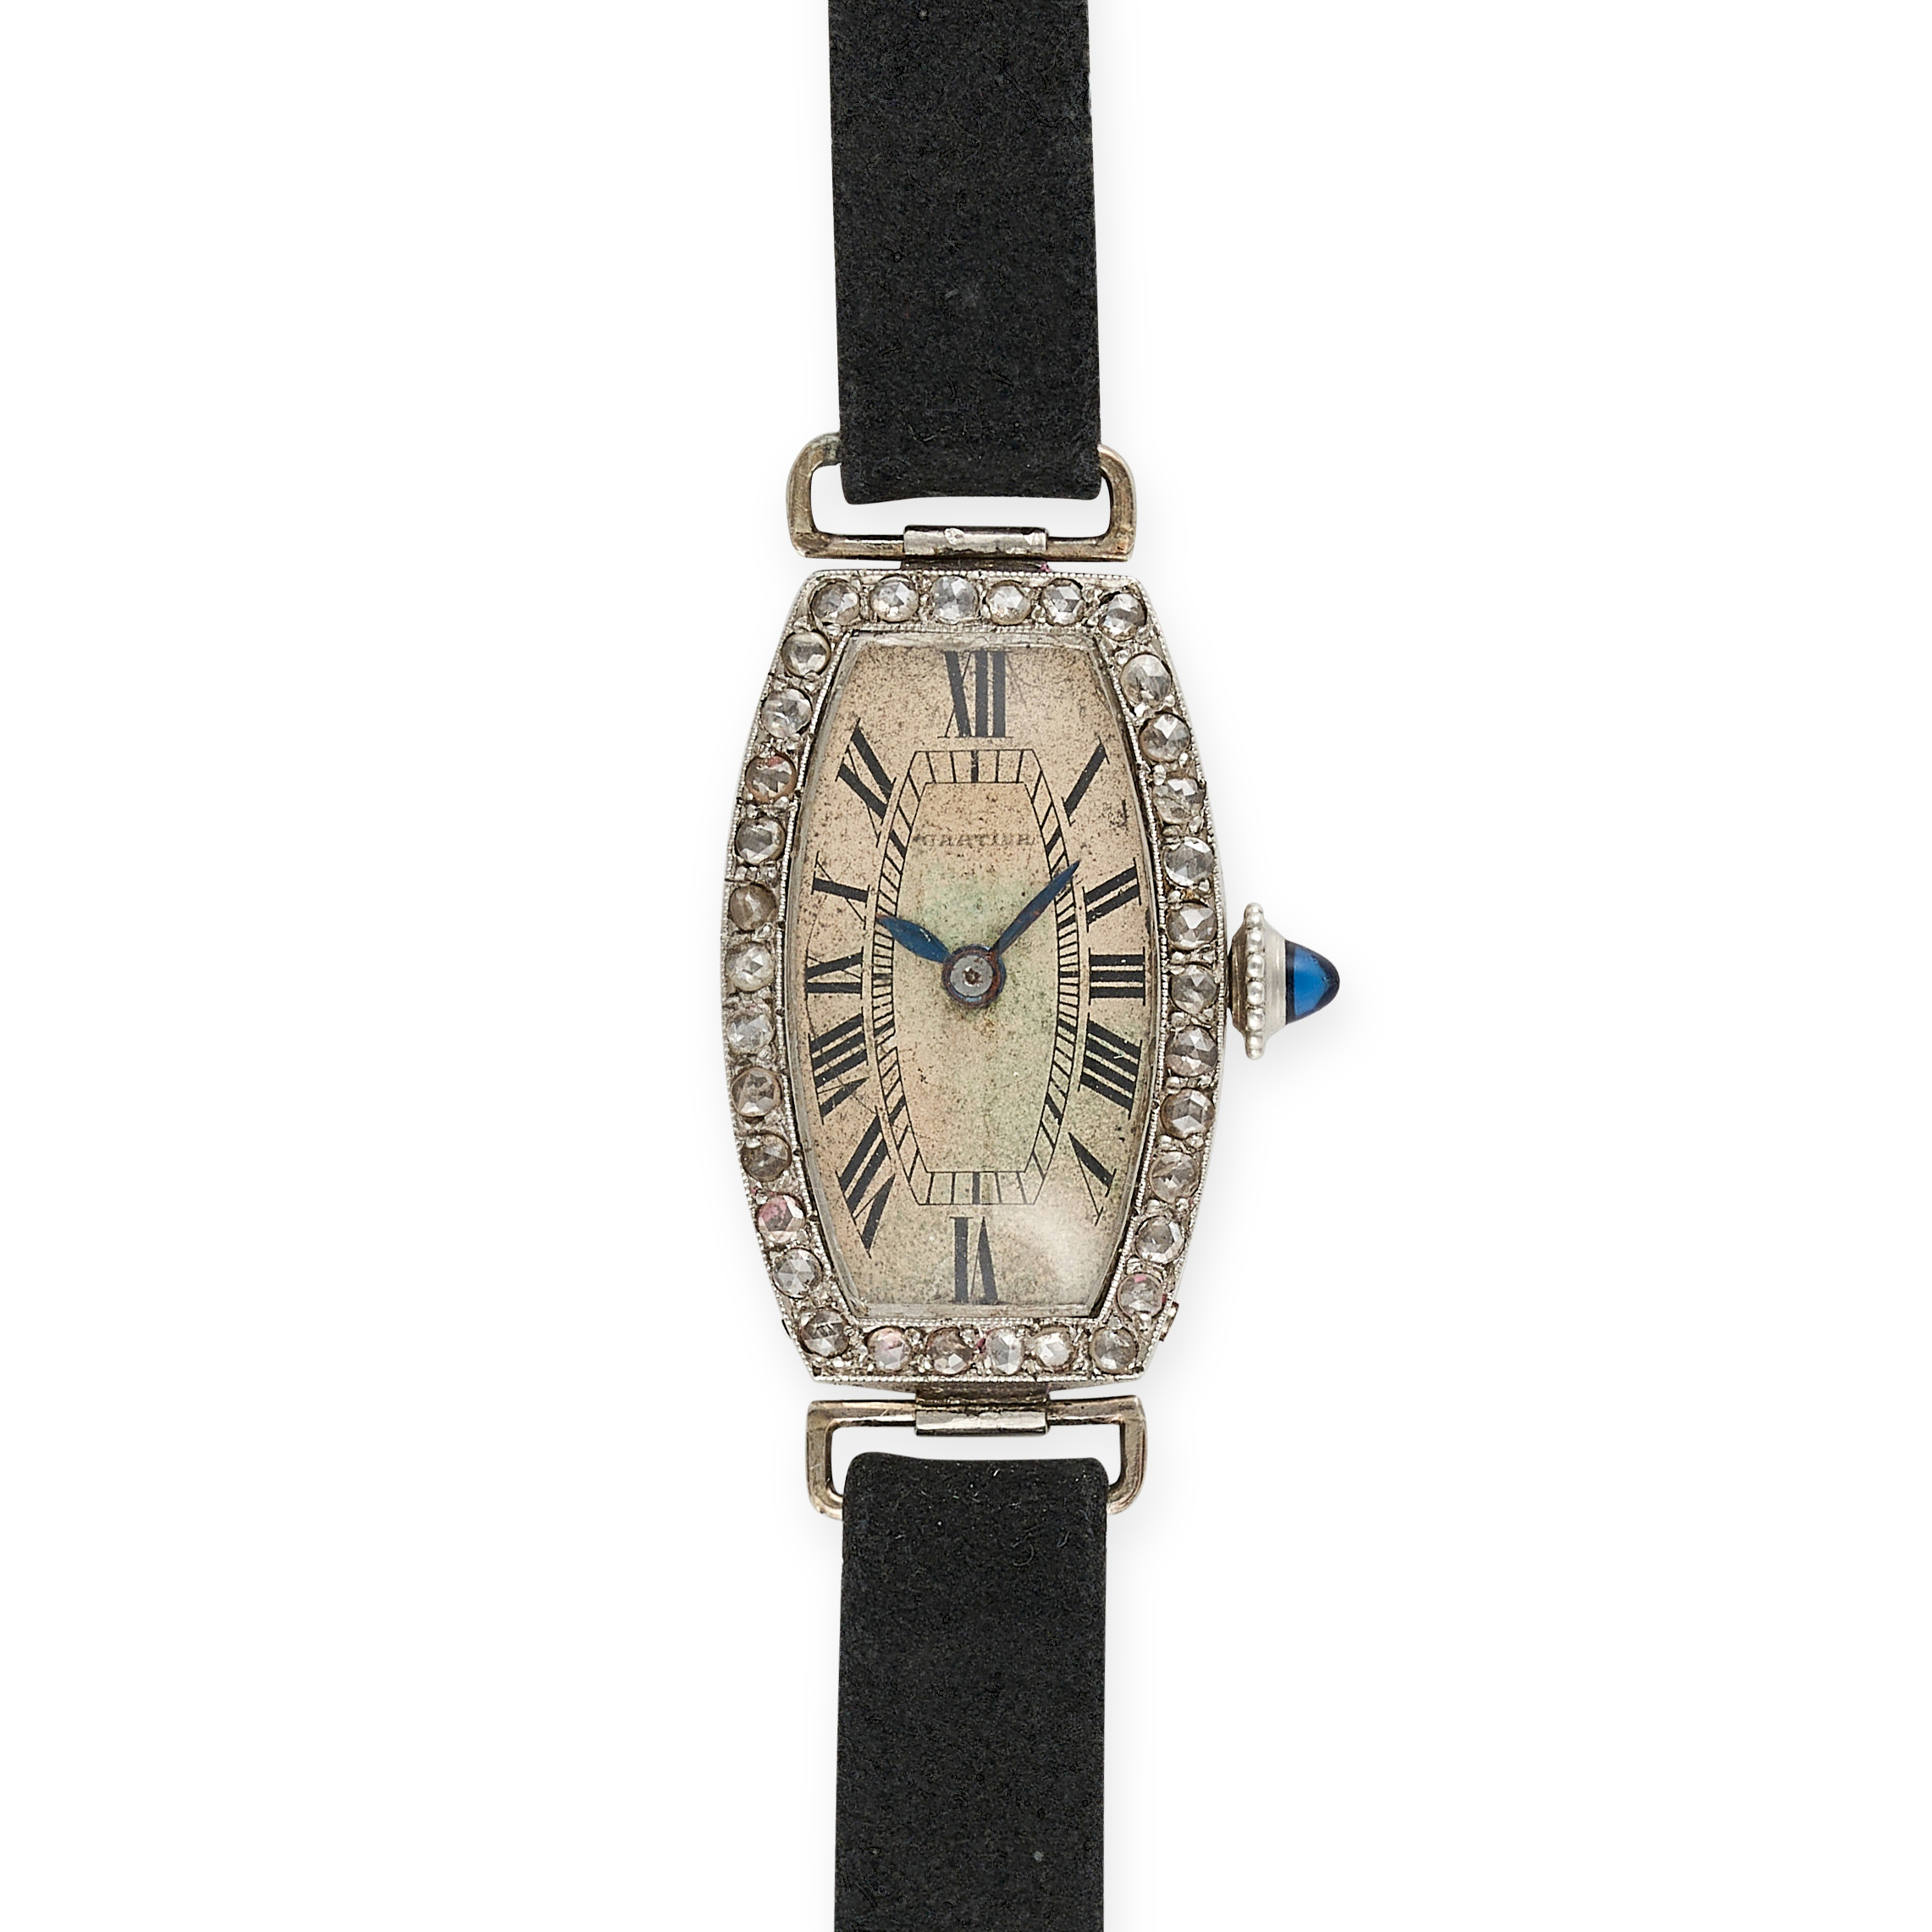 CARTIER, A VINTAGE DIAMOND TONNEAU COCKTAIL WATCH in stainless steel, off-white dial with painted...